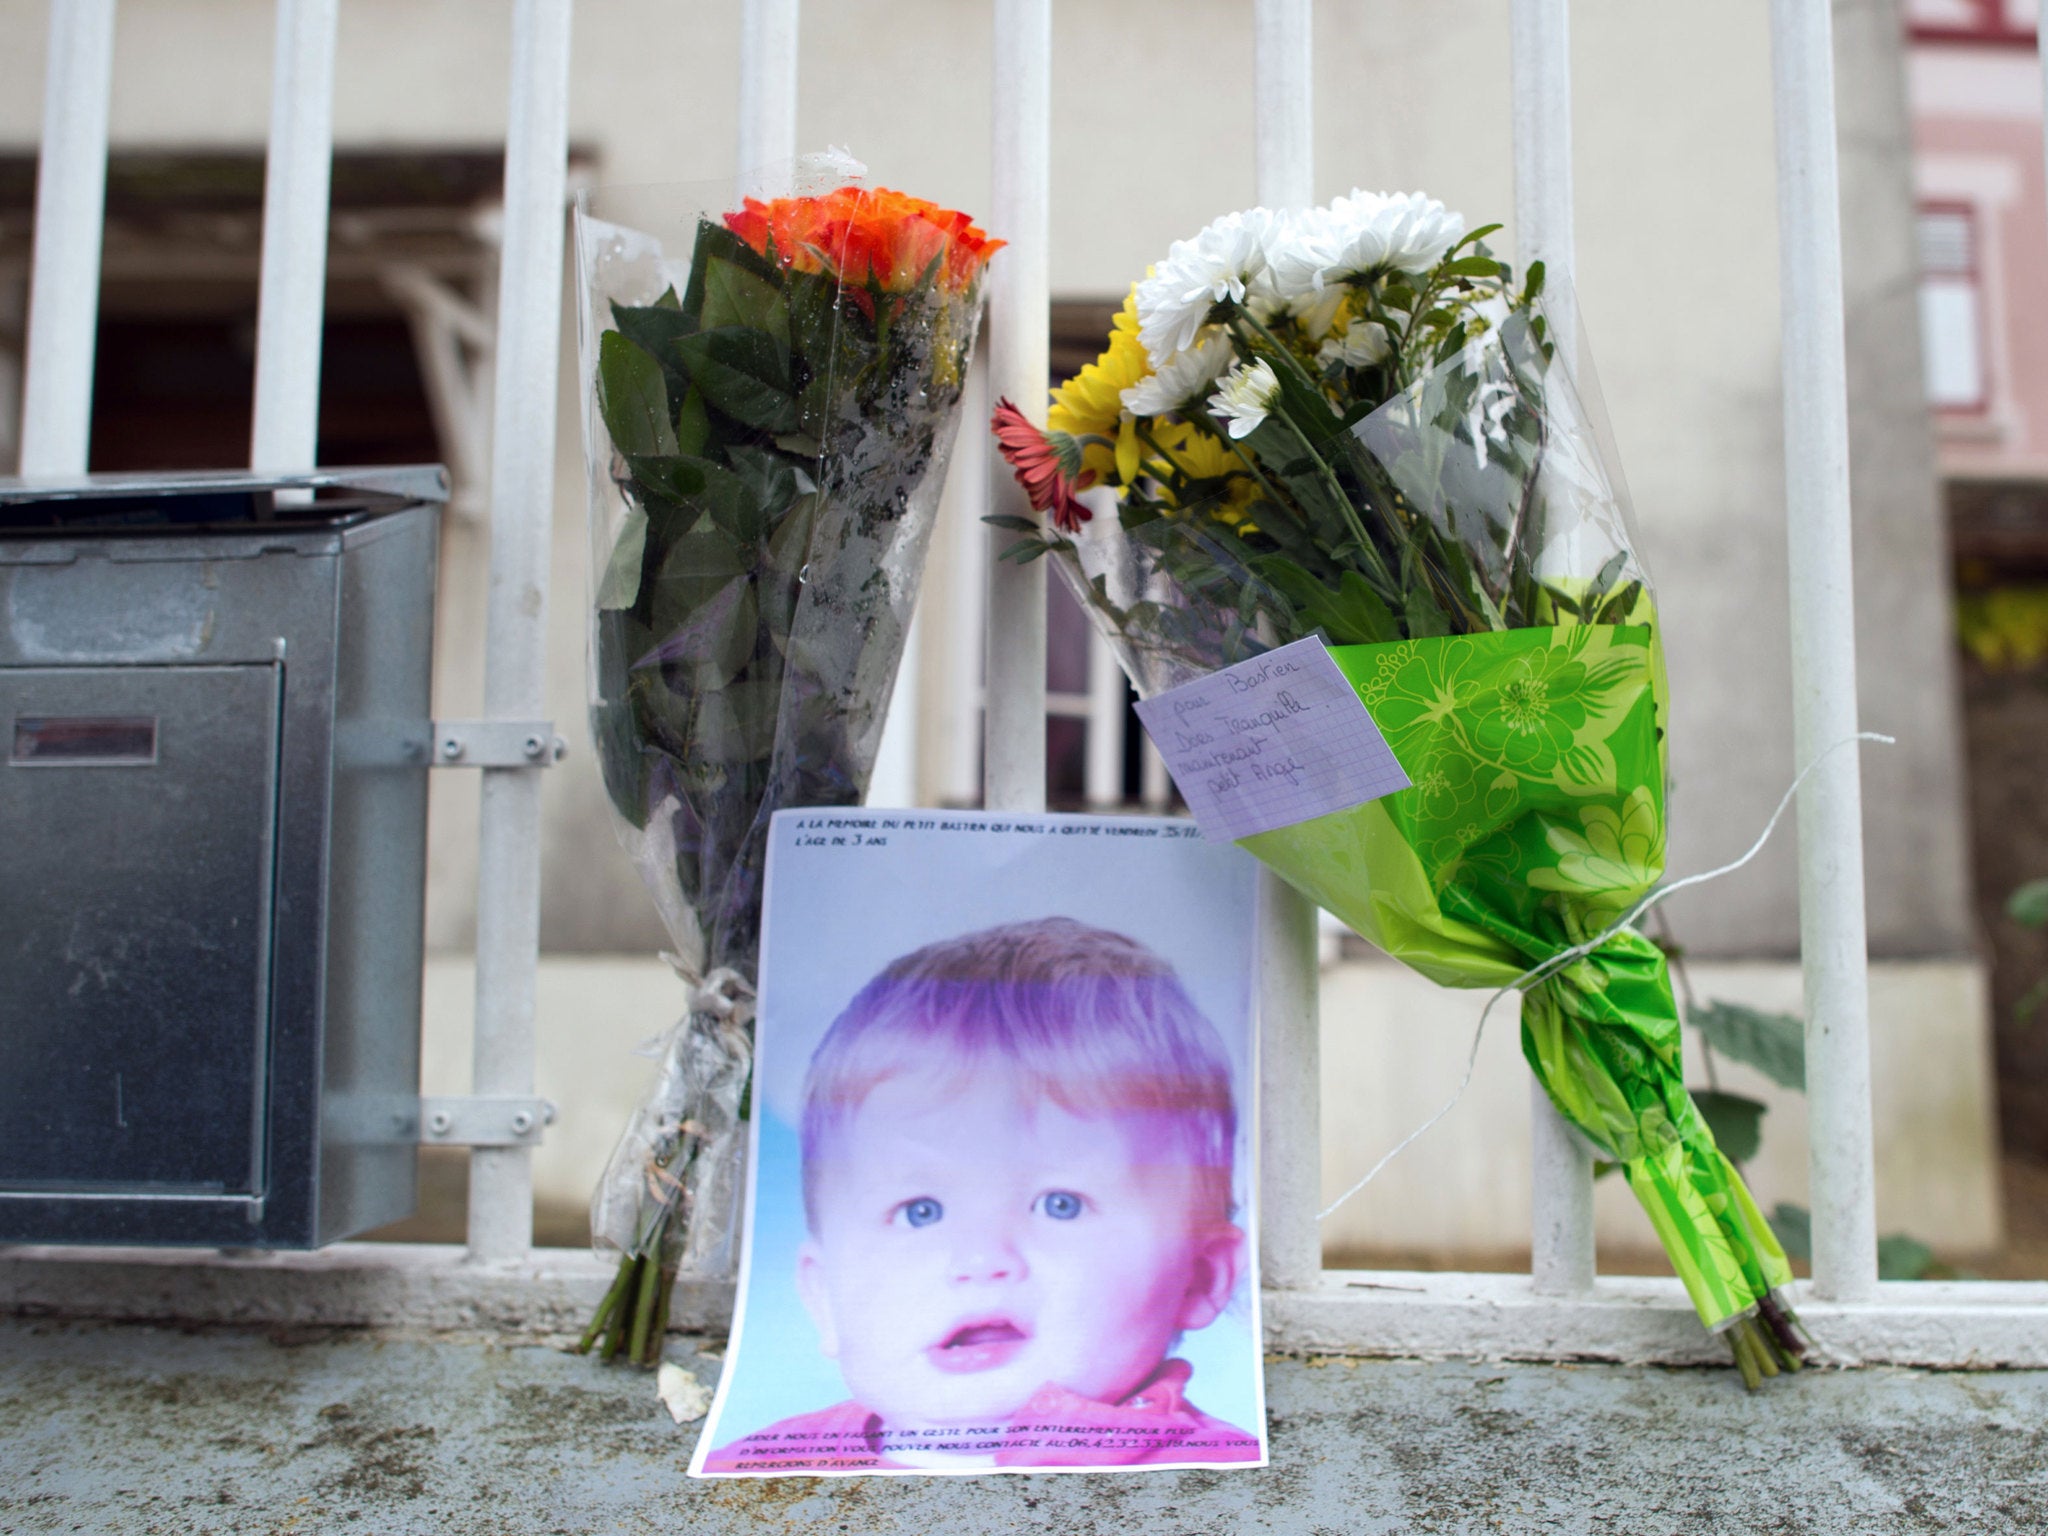 Three-year-old child Bastien Champenois was found dead at his family home in 2011